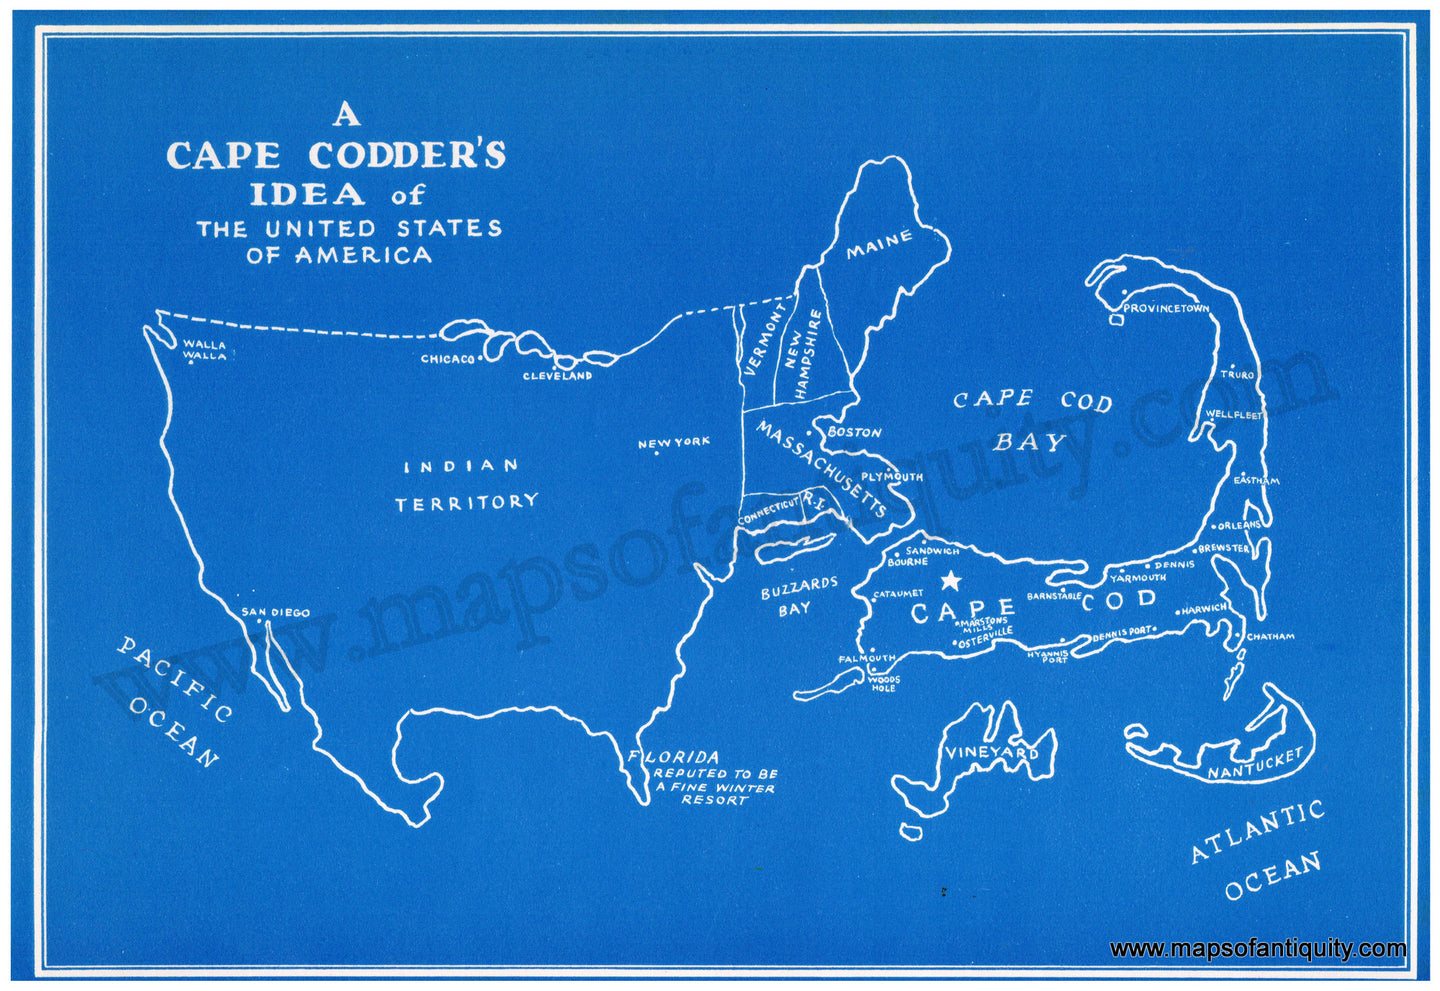 Reproduction-A-Cape-Codder's-Idea-of-the-United-States-of-America-Blue-Print-Date-Unknown-Massachusetts-20th-century-Maps-of-Antiquity